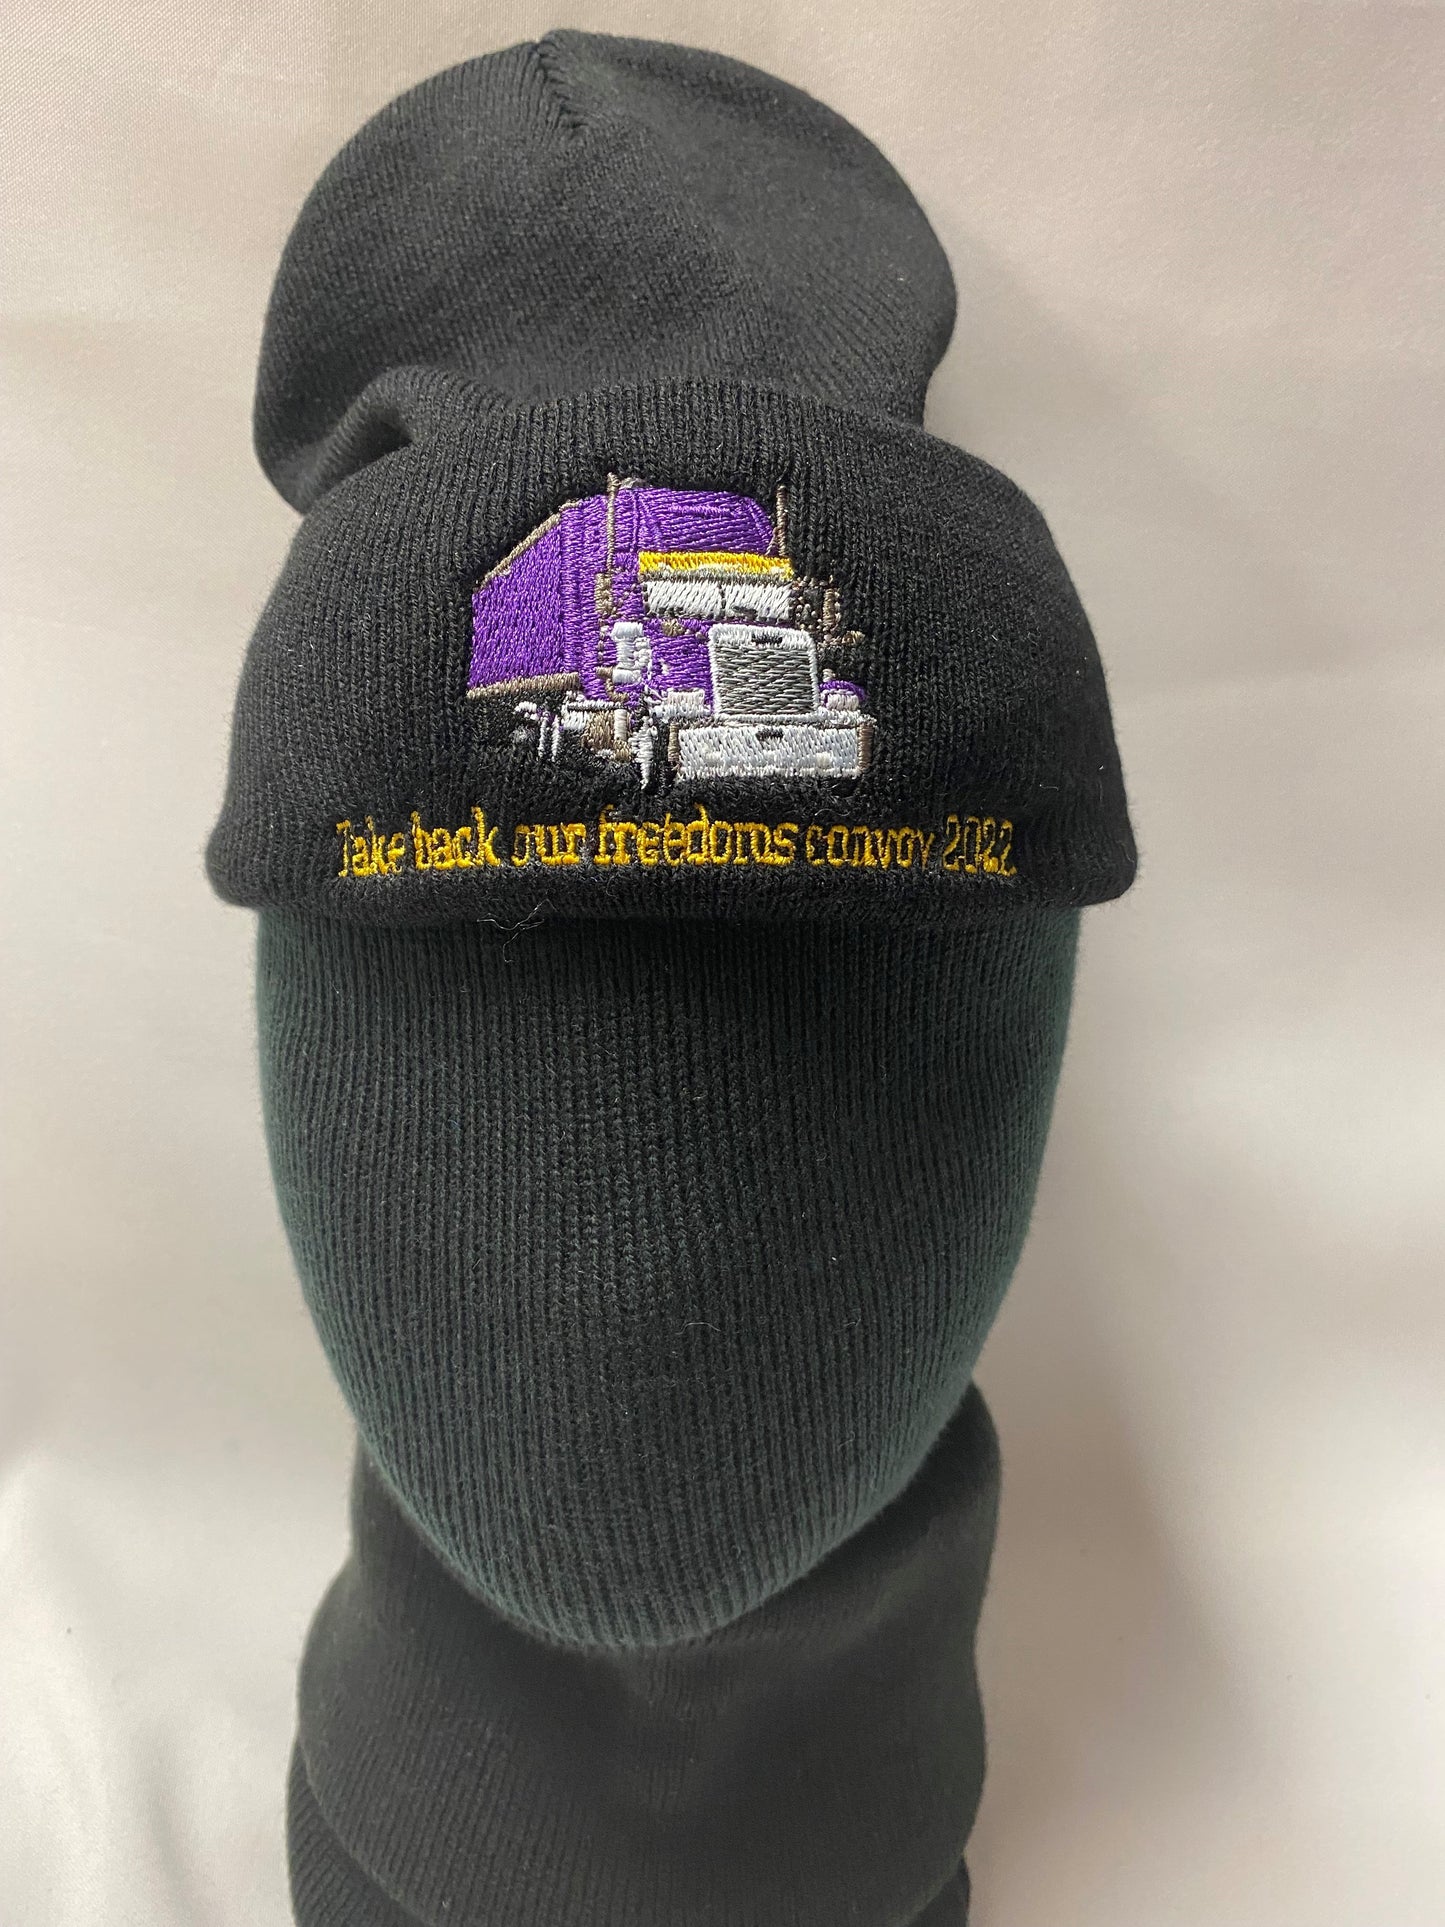 TRUCKER TOQUE black: "Take back our freedoms convoy 2022"